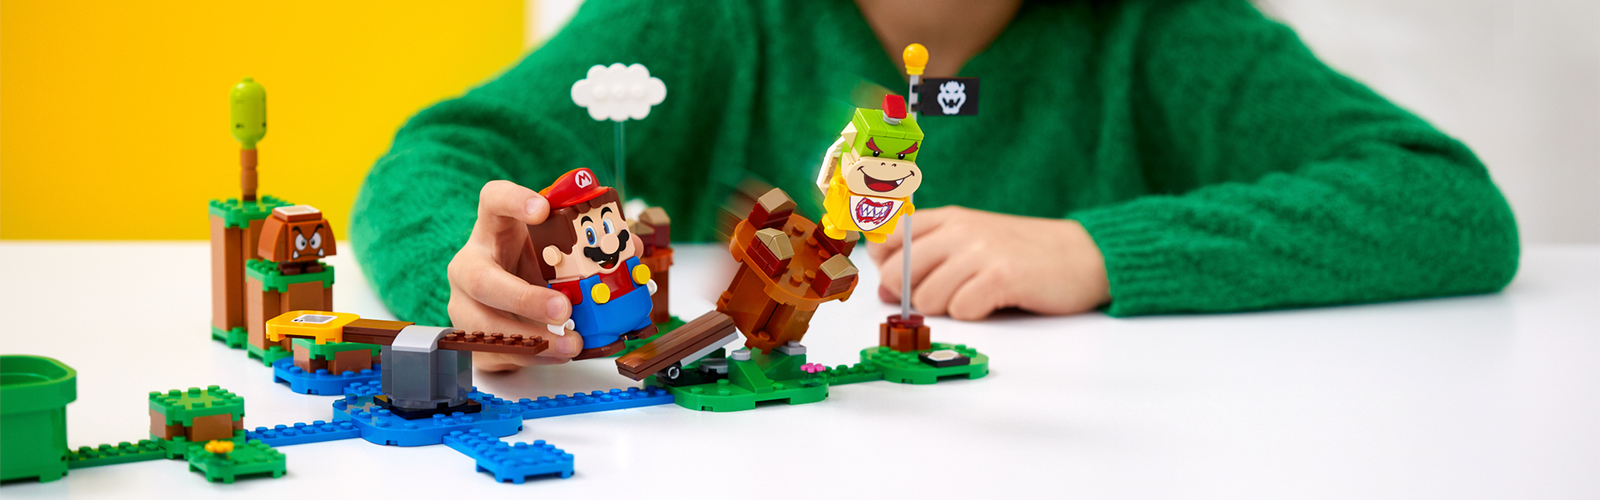 Winning Moves Super Mario and Friends 500 Piece Jigsaw Puzzle Game, Piece  Together Mario, Luigi, Yoshi, Bowser and Toad, Gift and Toy for Ages 10 Plus